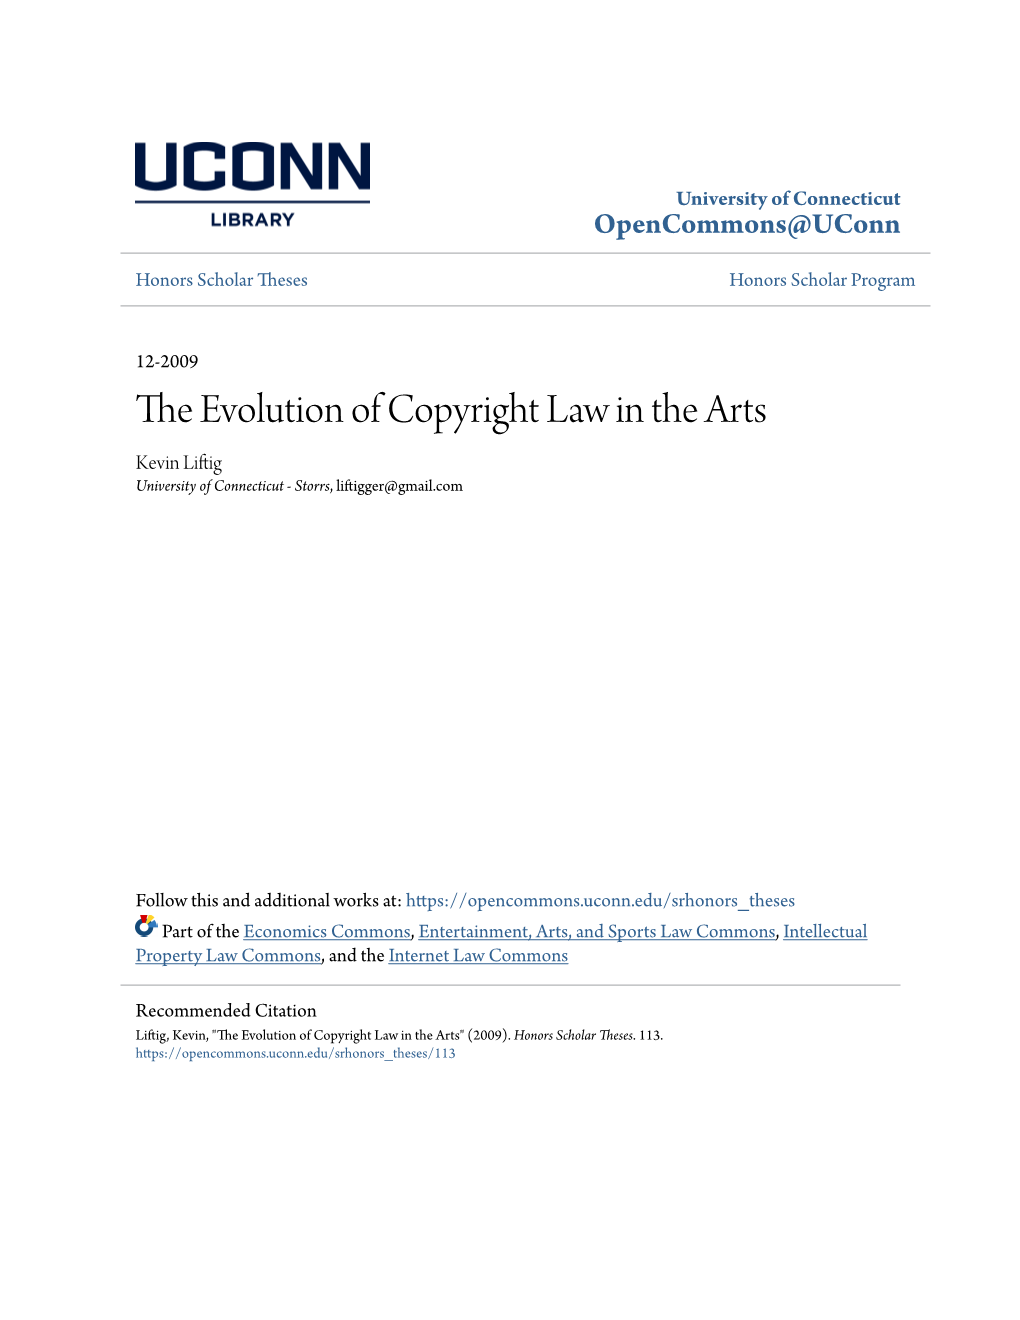 The Evolution of Copyright Law in the Arts